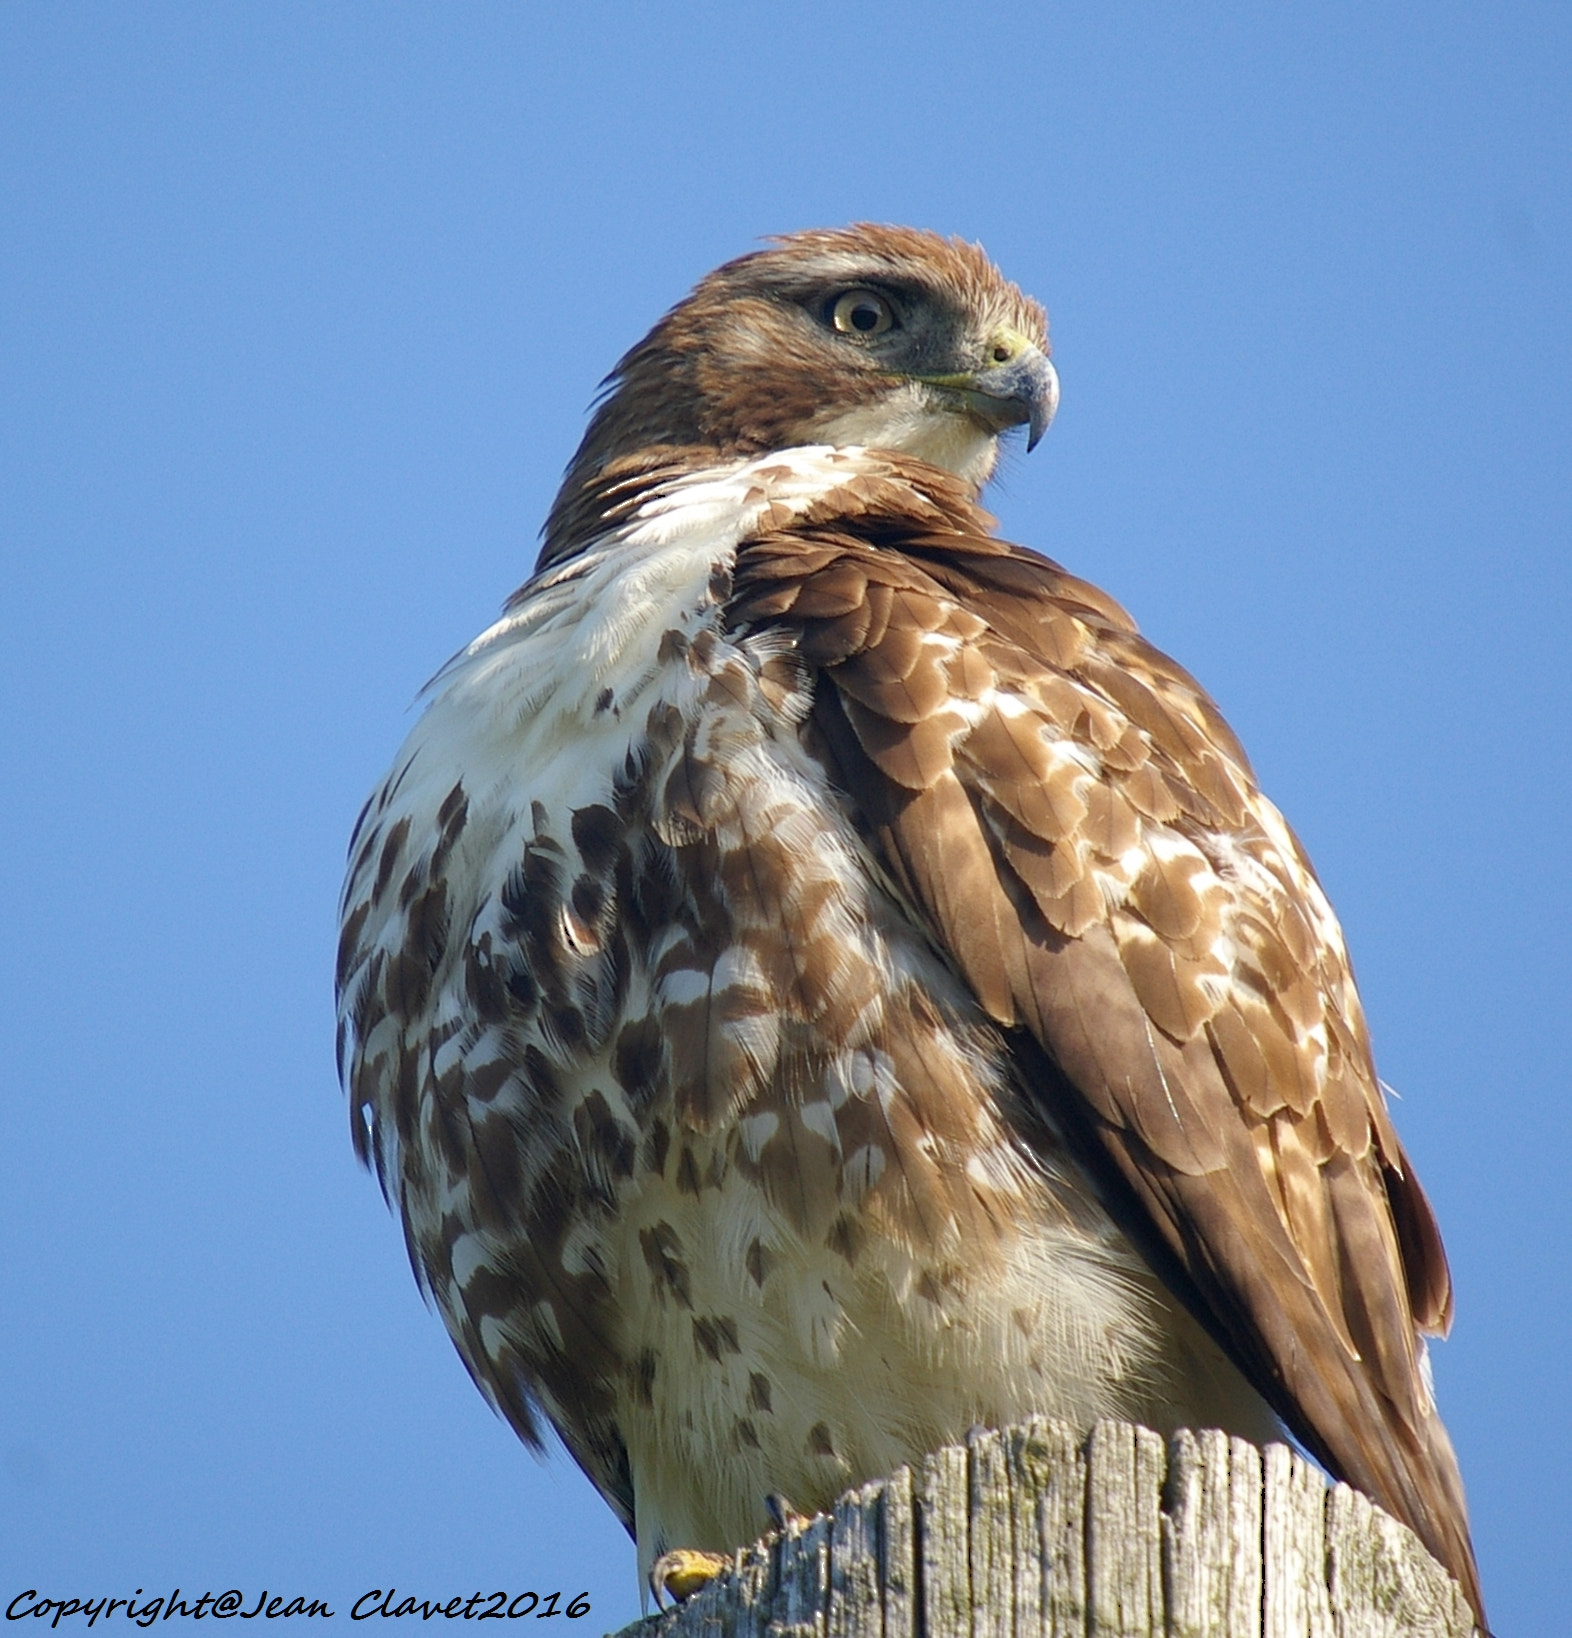 Pentax K100D sample photo. Buse à queue rousse / red-tailed hawk photography